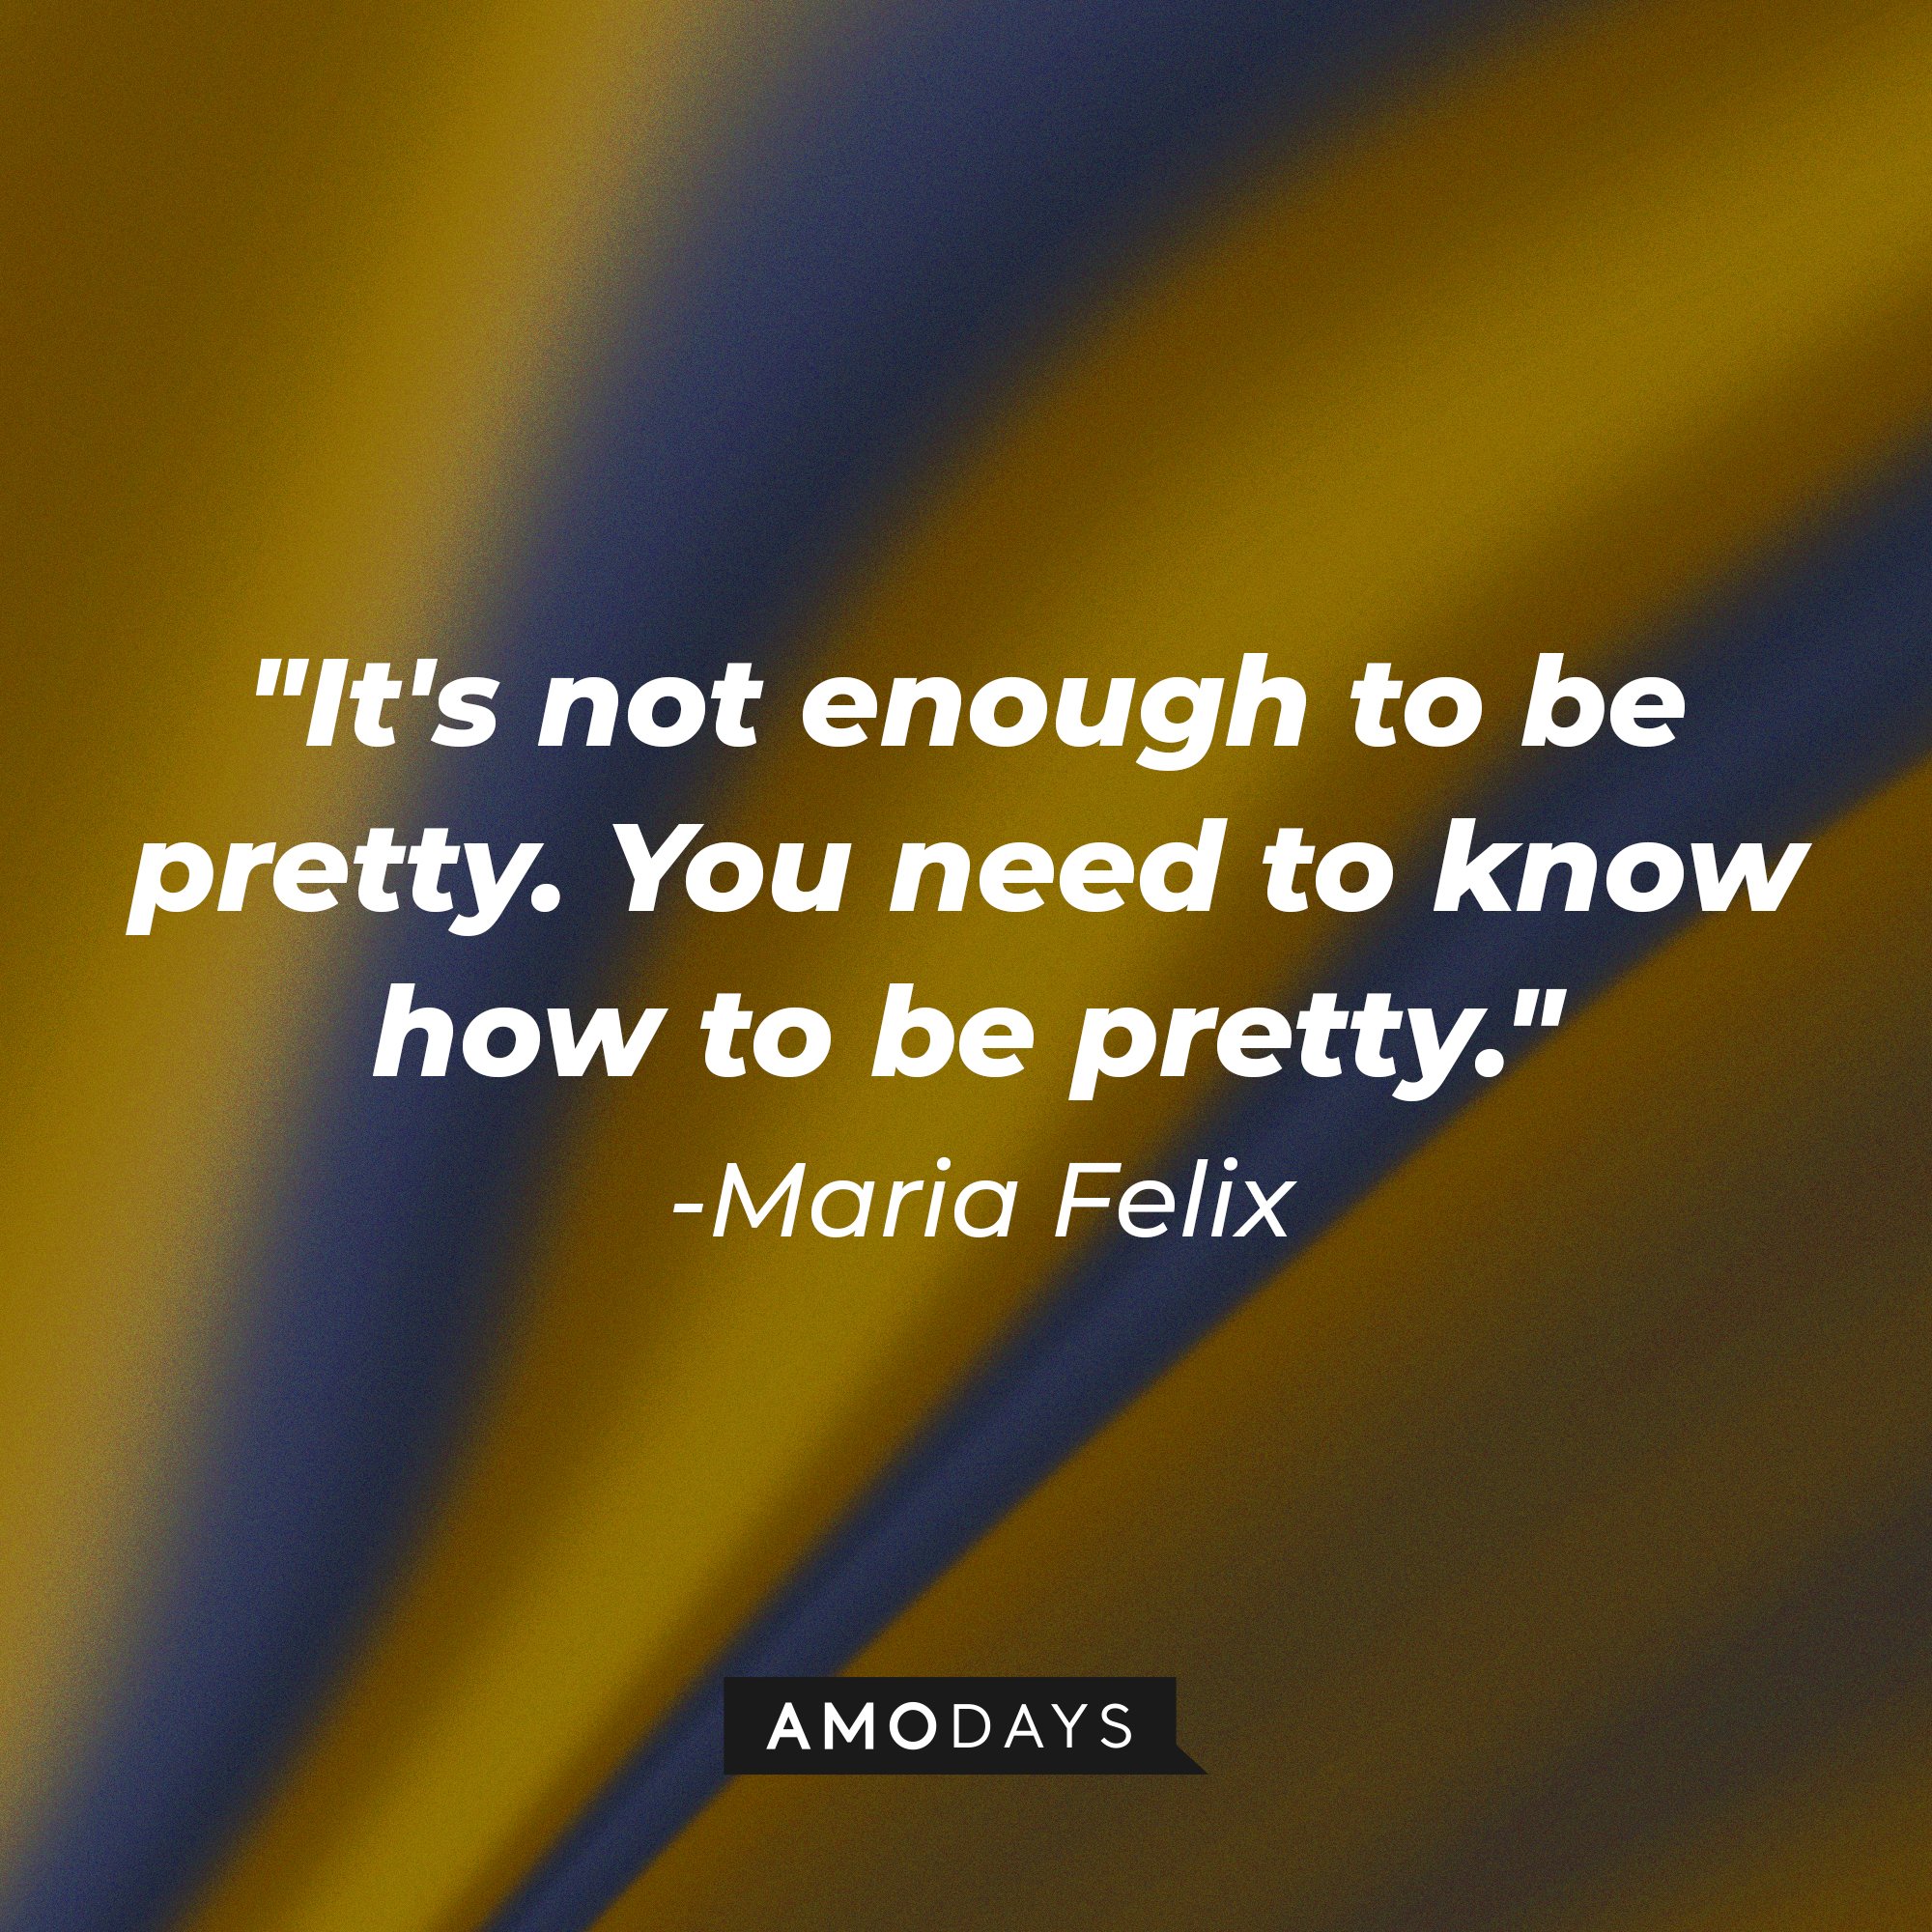 Maria Felix’s quote: "It's not enough to be pretty. You need to know how to be pretty." | Image: AmoDays